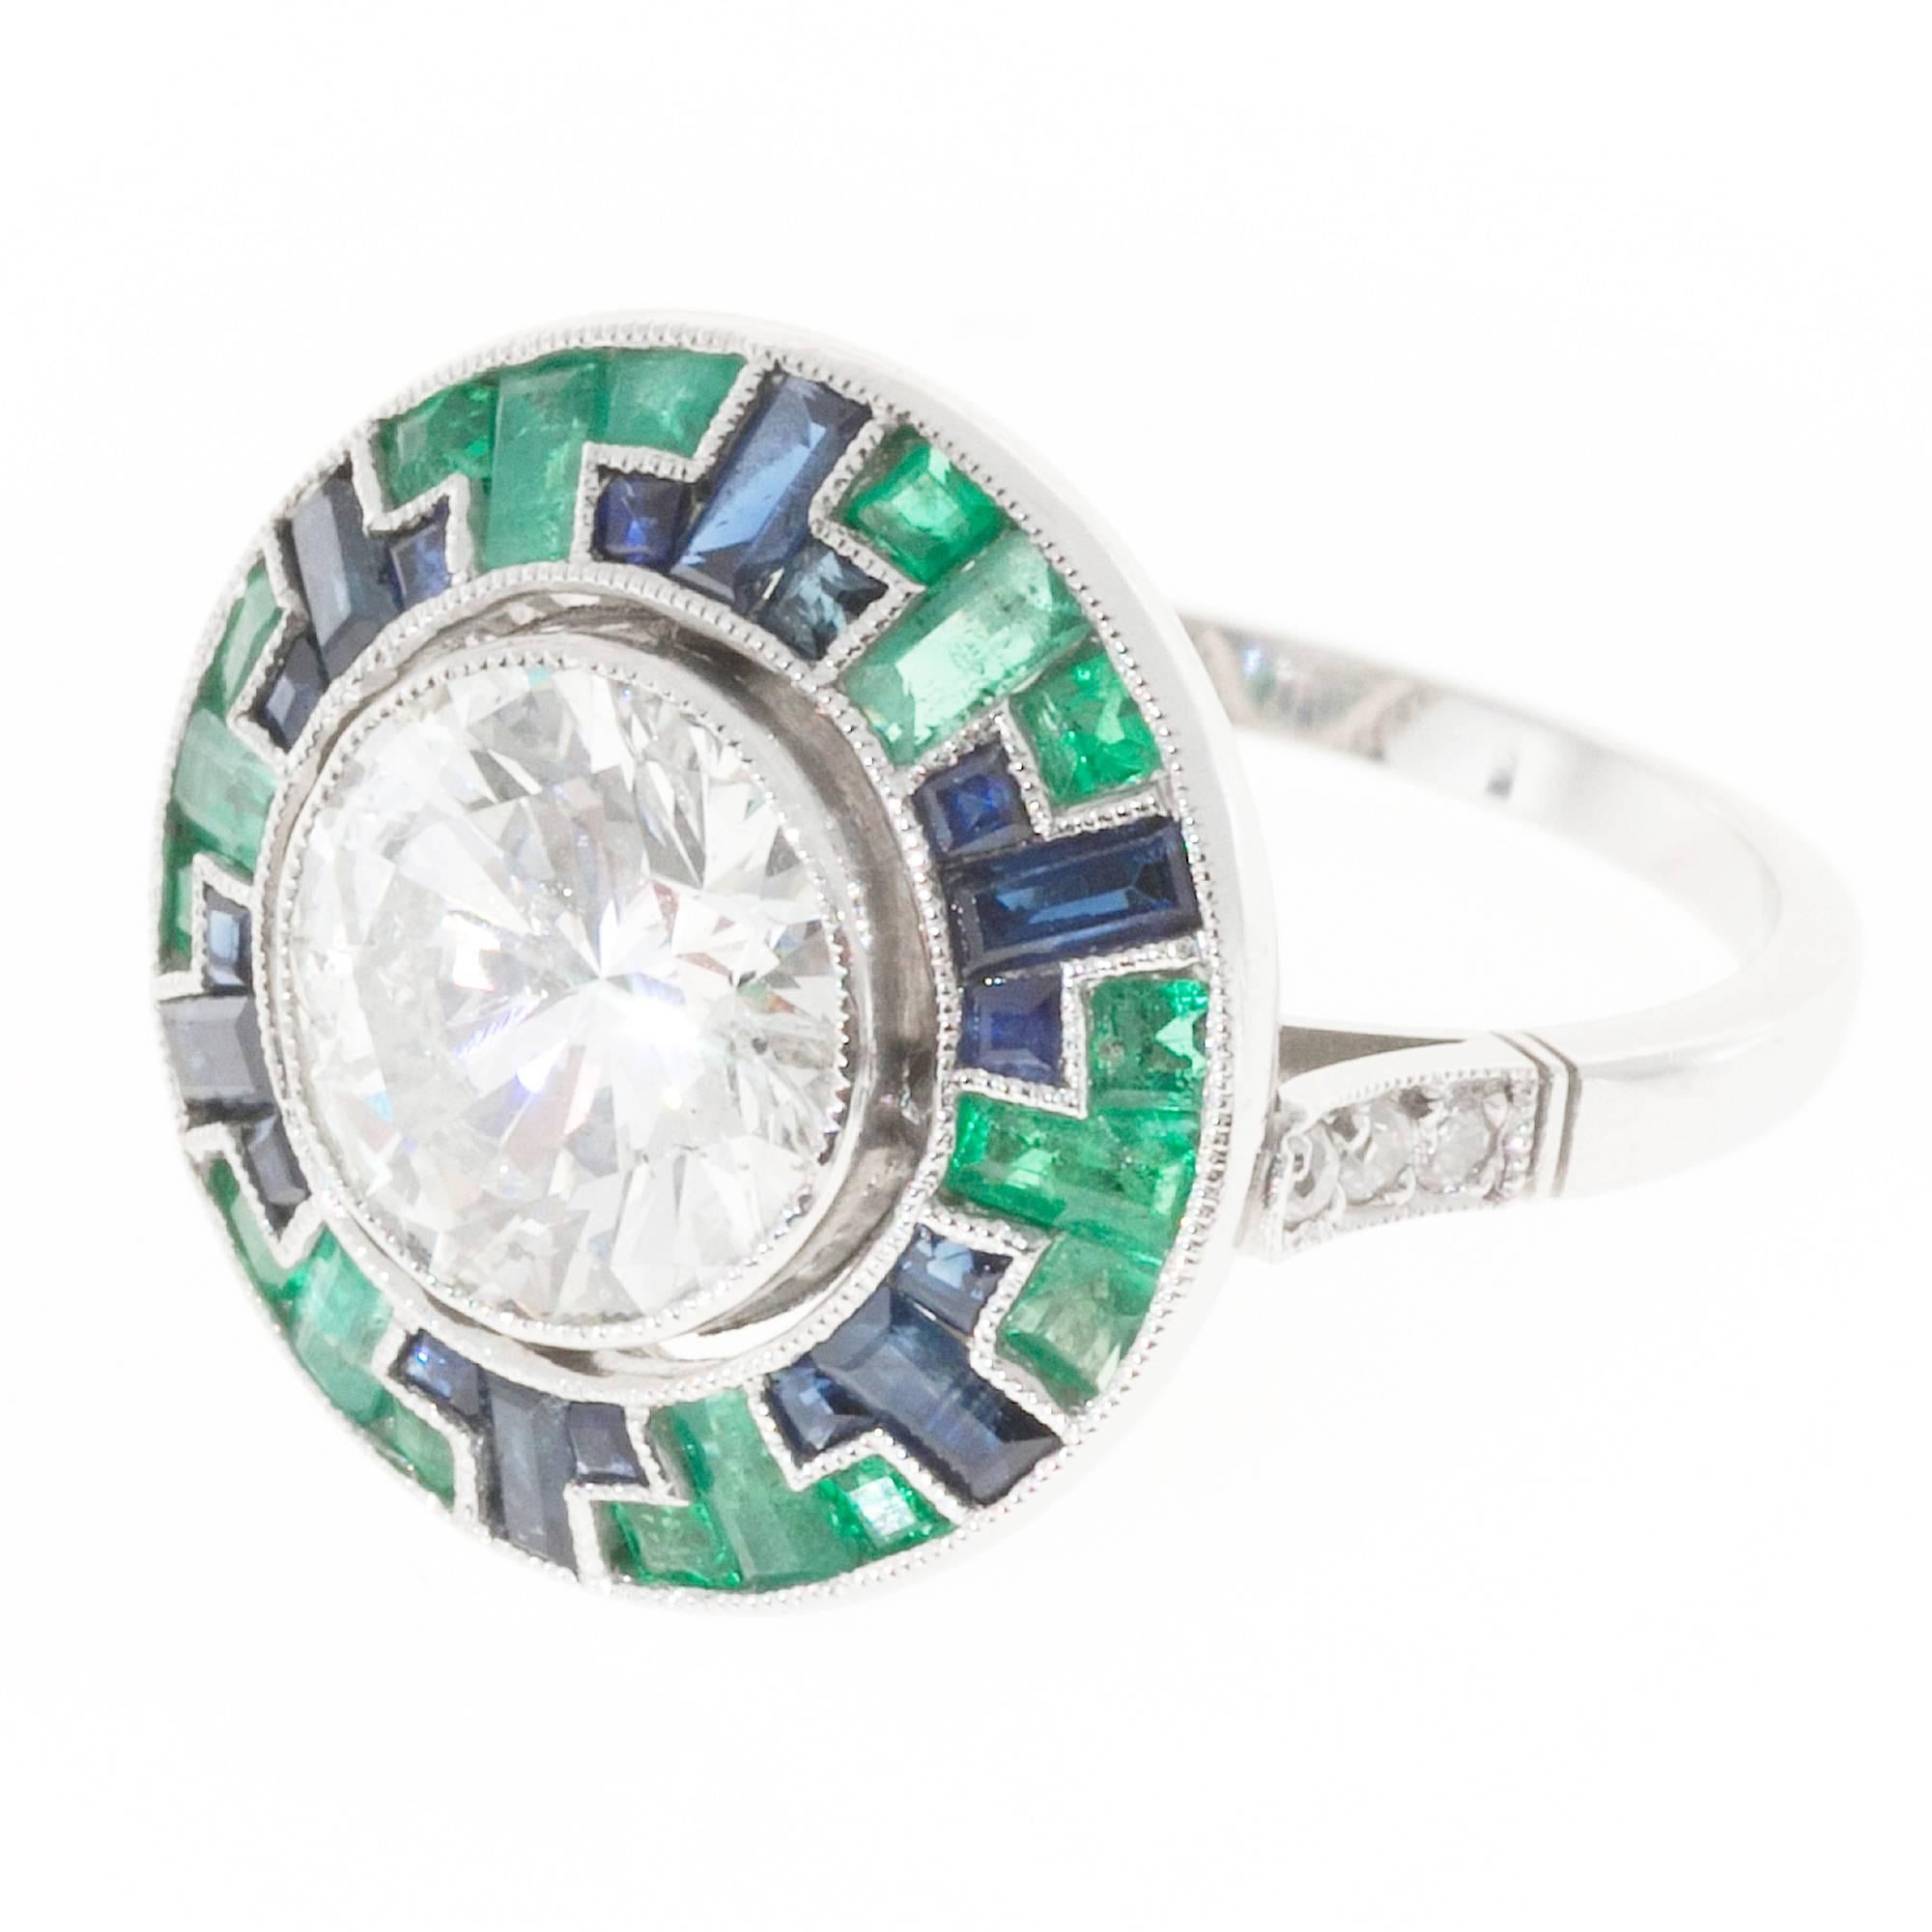 1930-1940 Center diamond with emerald and sapphire baguette and square Mosaic style halo platinum ring. crt

1 round brilliant cut diamond, approx. total weight 2.50cts, F-G, SI2, 8.40 x 8.38 x 4.96mm, Depth: 59.1%  Table: 61%, Medium blue